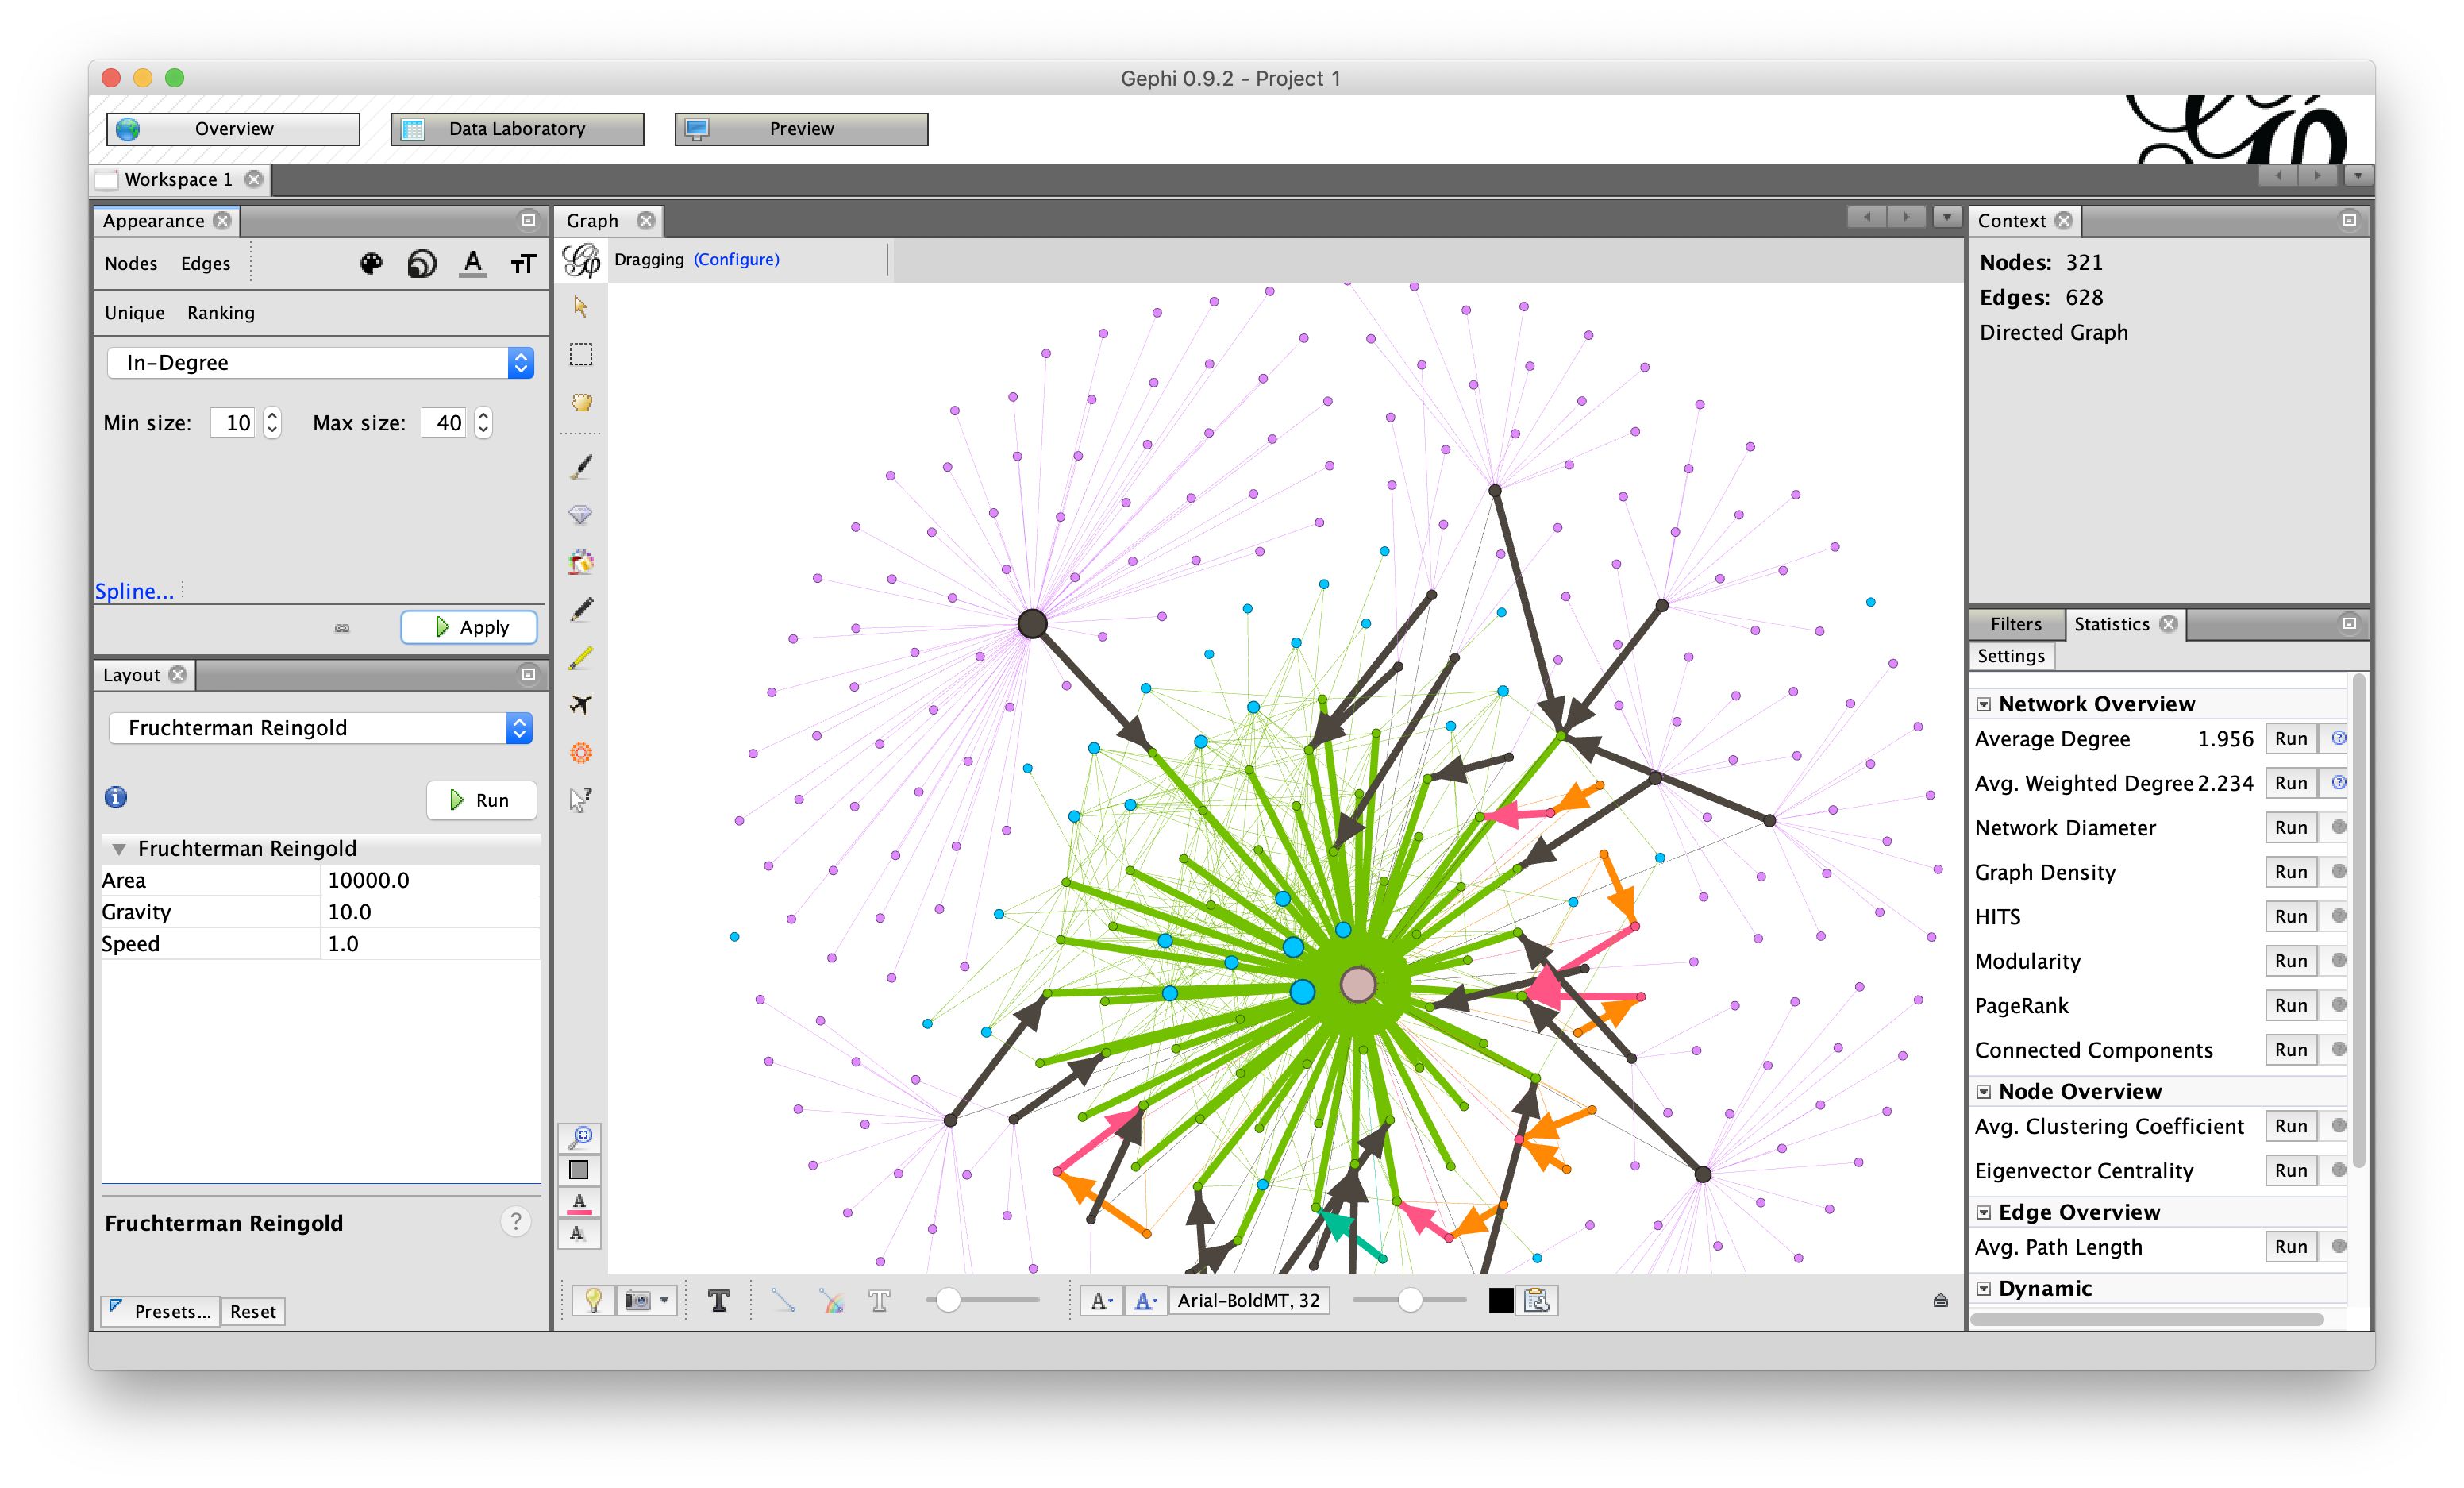 Screenshot of Gephi. A small trove of emails has been visualized as a network. The entity schema type has been used to color nodes, while the size is based on the amount of inbound links (i.e. In-Degree).